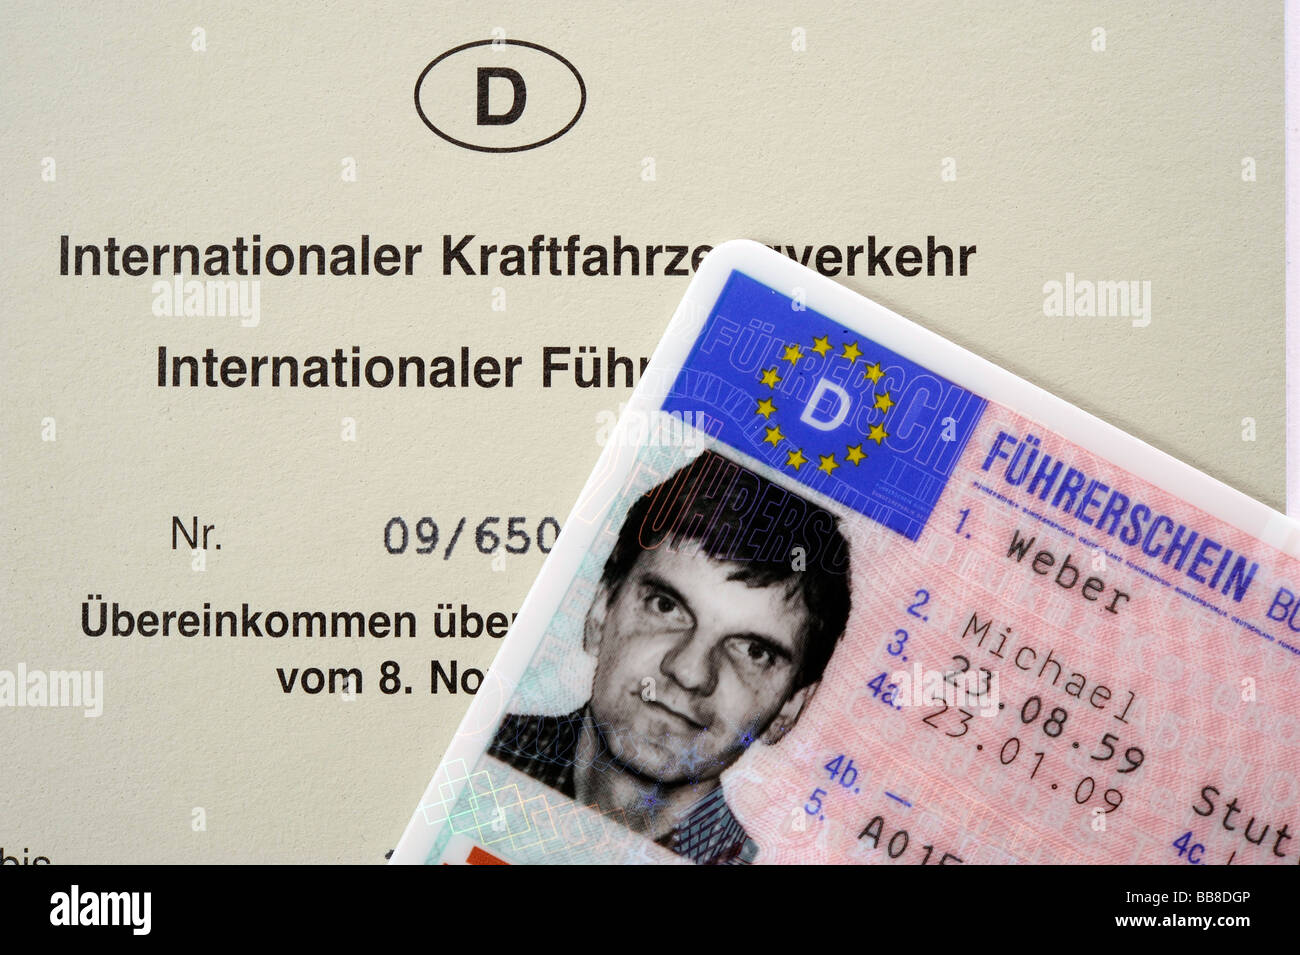 International and national driving license Federal Republic of Germany Stock Photo